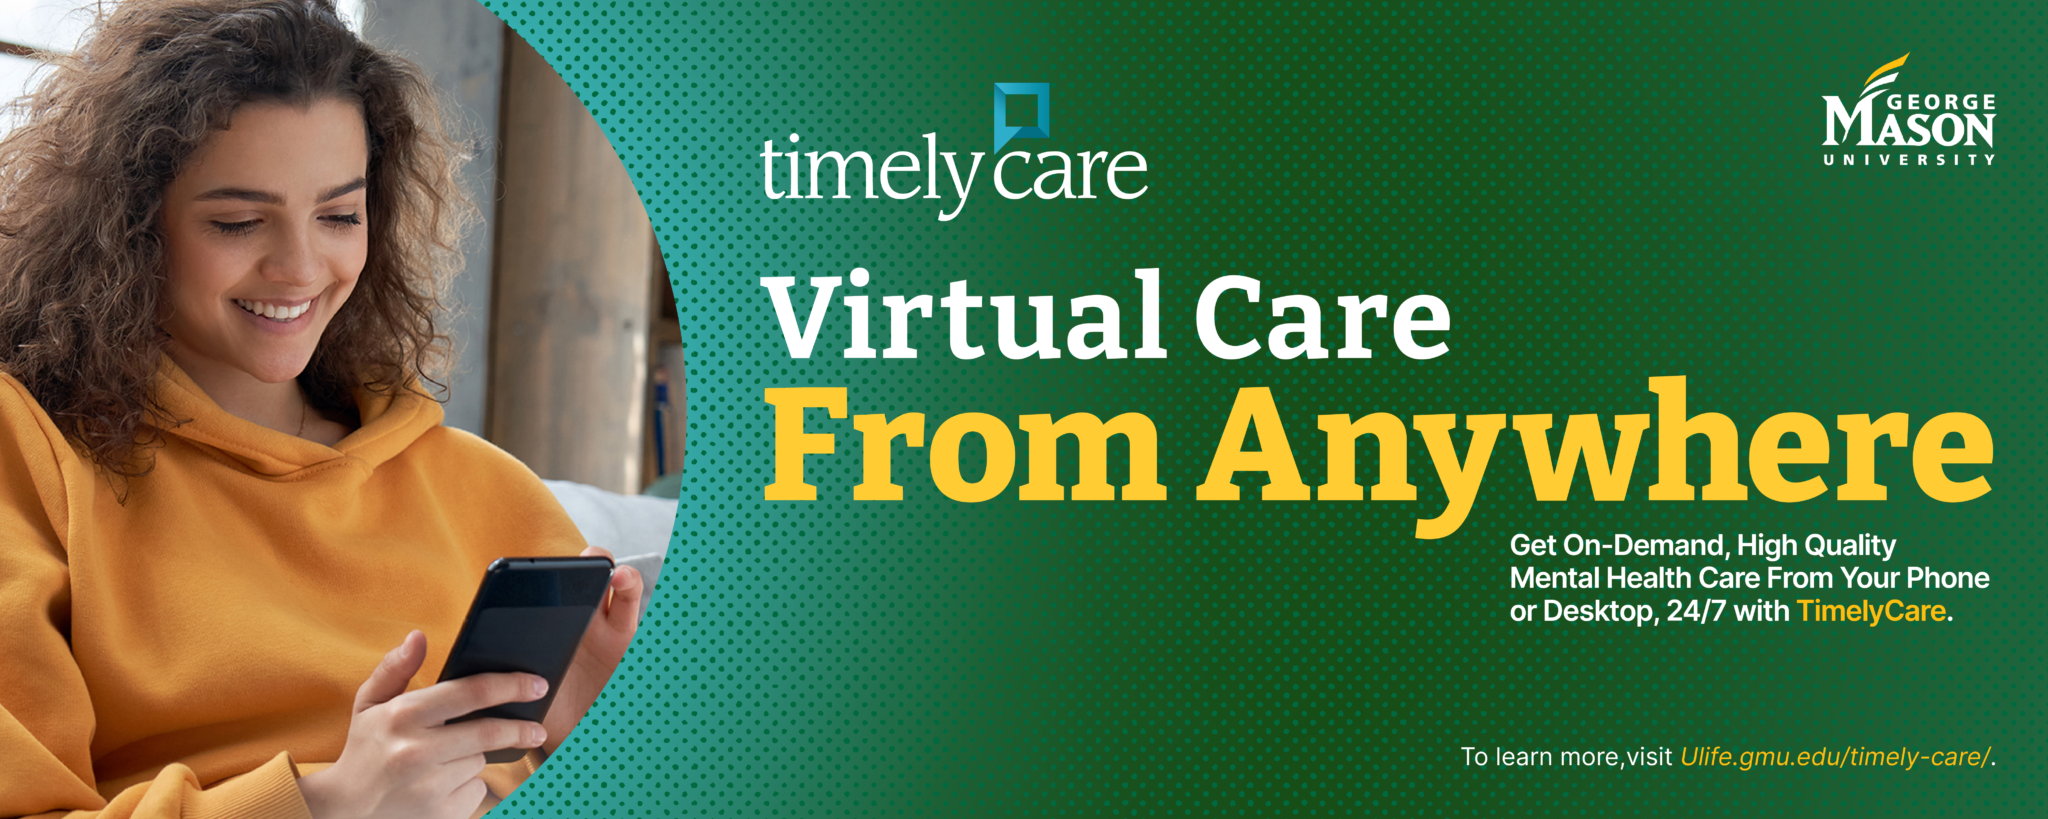 Timely Care: get virtual care from anywhere. Mental healthcare from your phone or desktop 24/7. Go to https://ulife.gmu.edu/timely-care/.